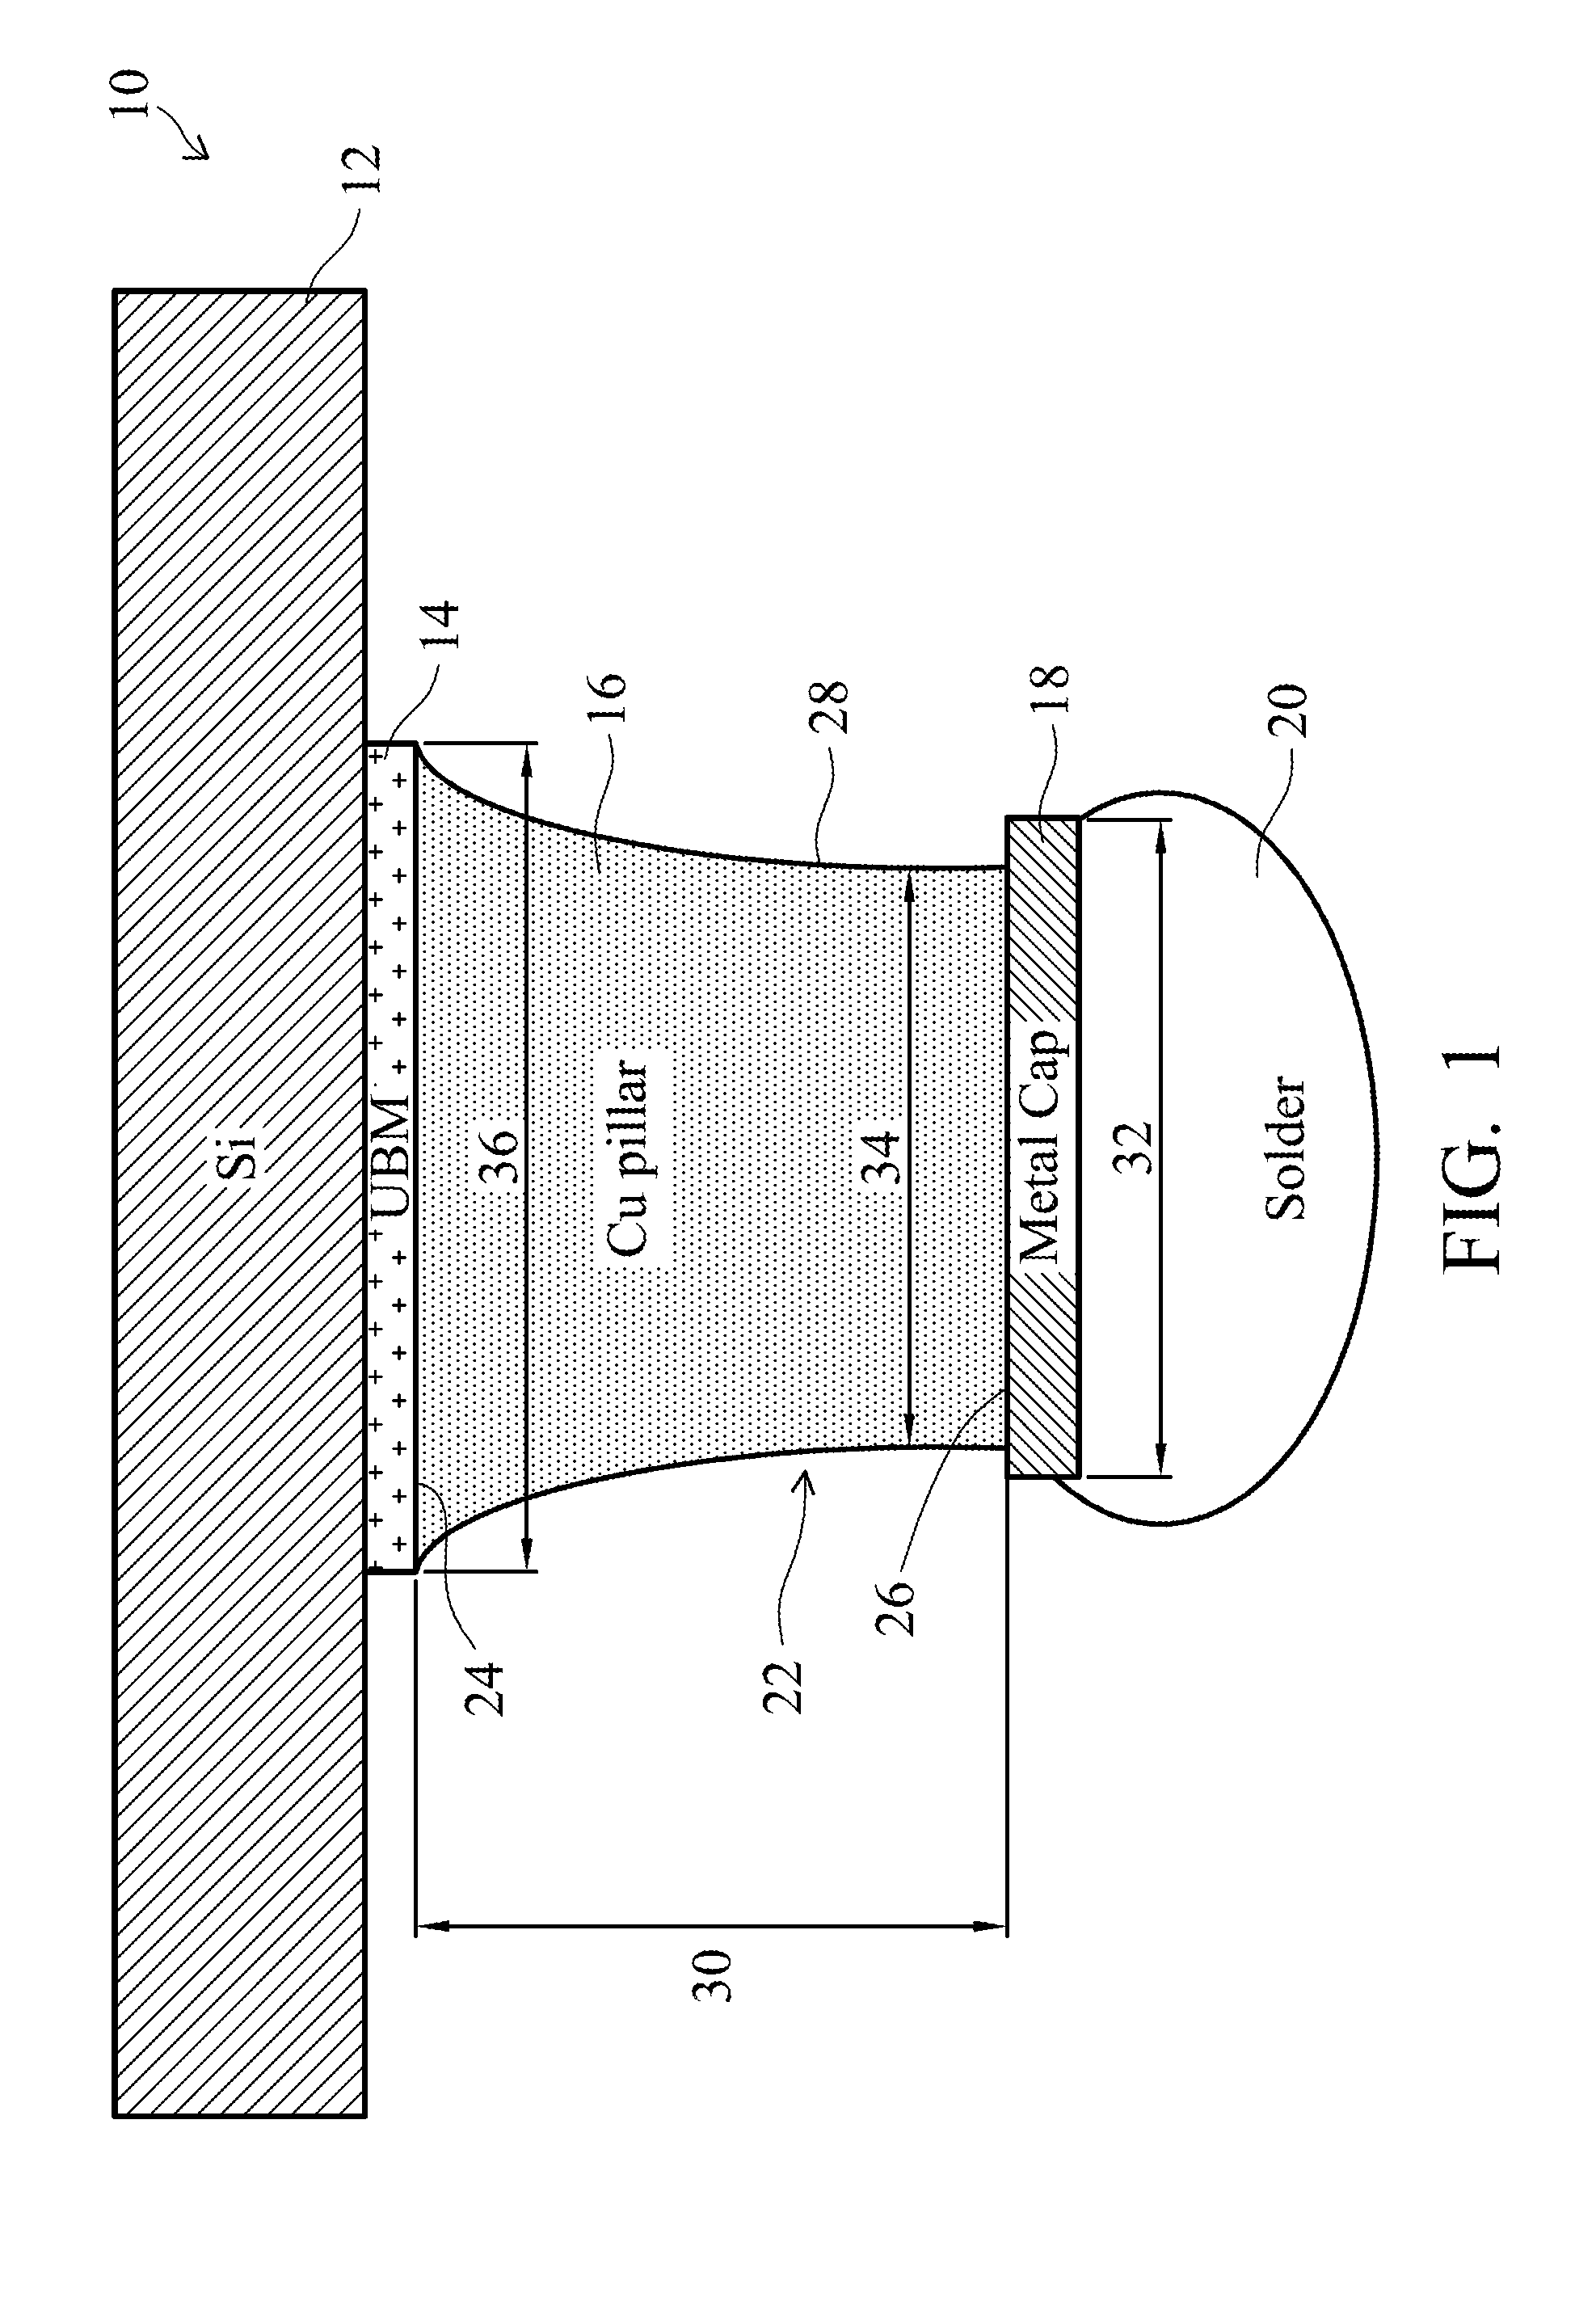 Ladder Bump Structures and Methods of Making Same